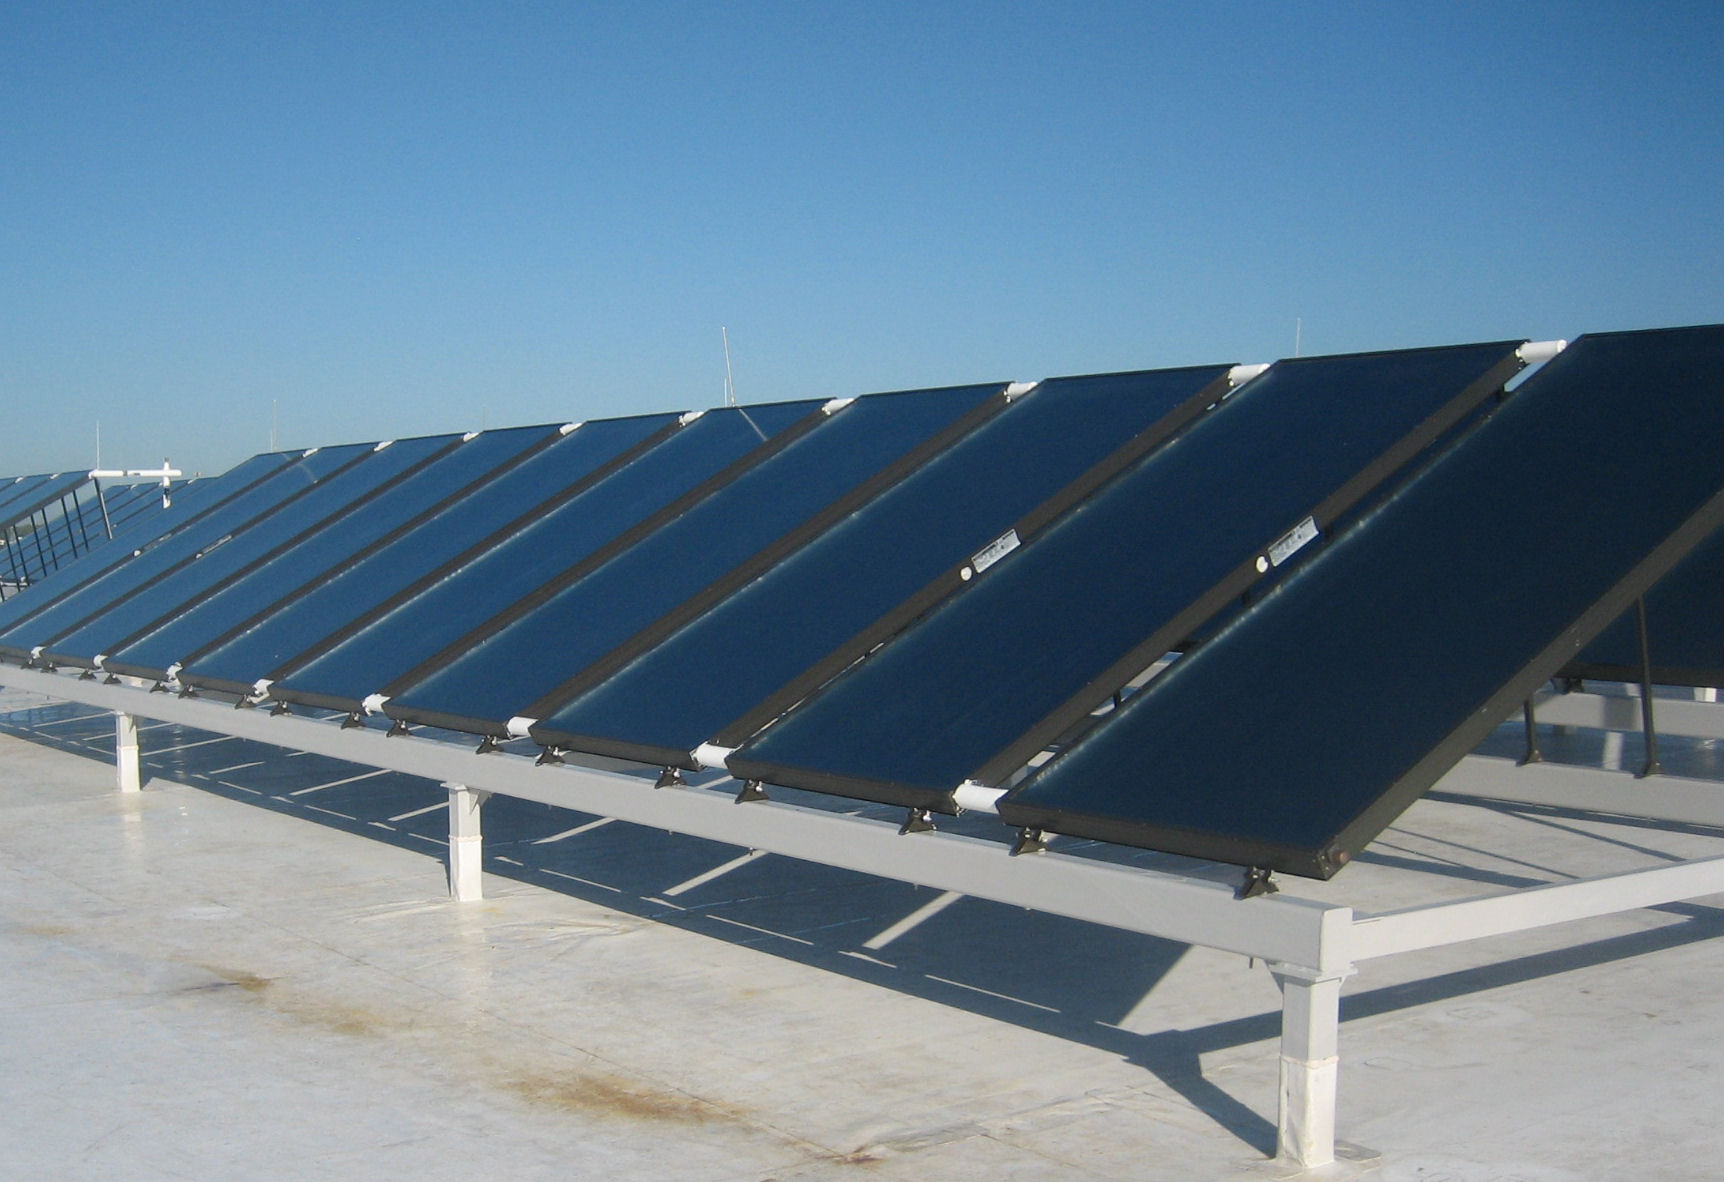 Bank of Solar Thermal Collectors